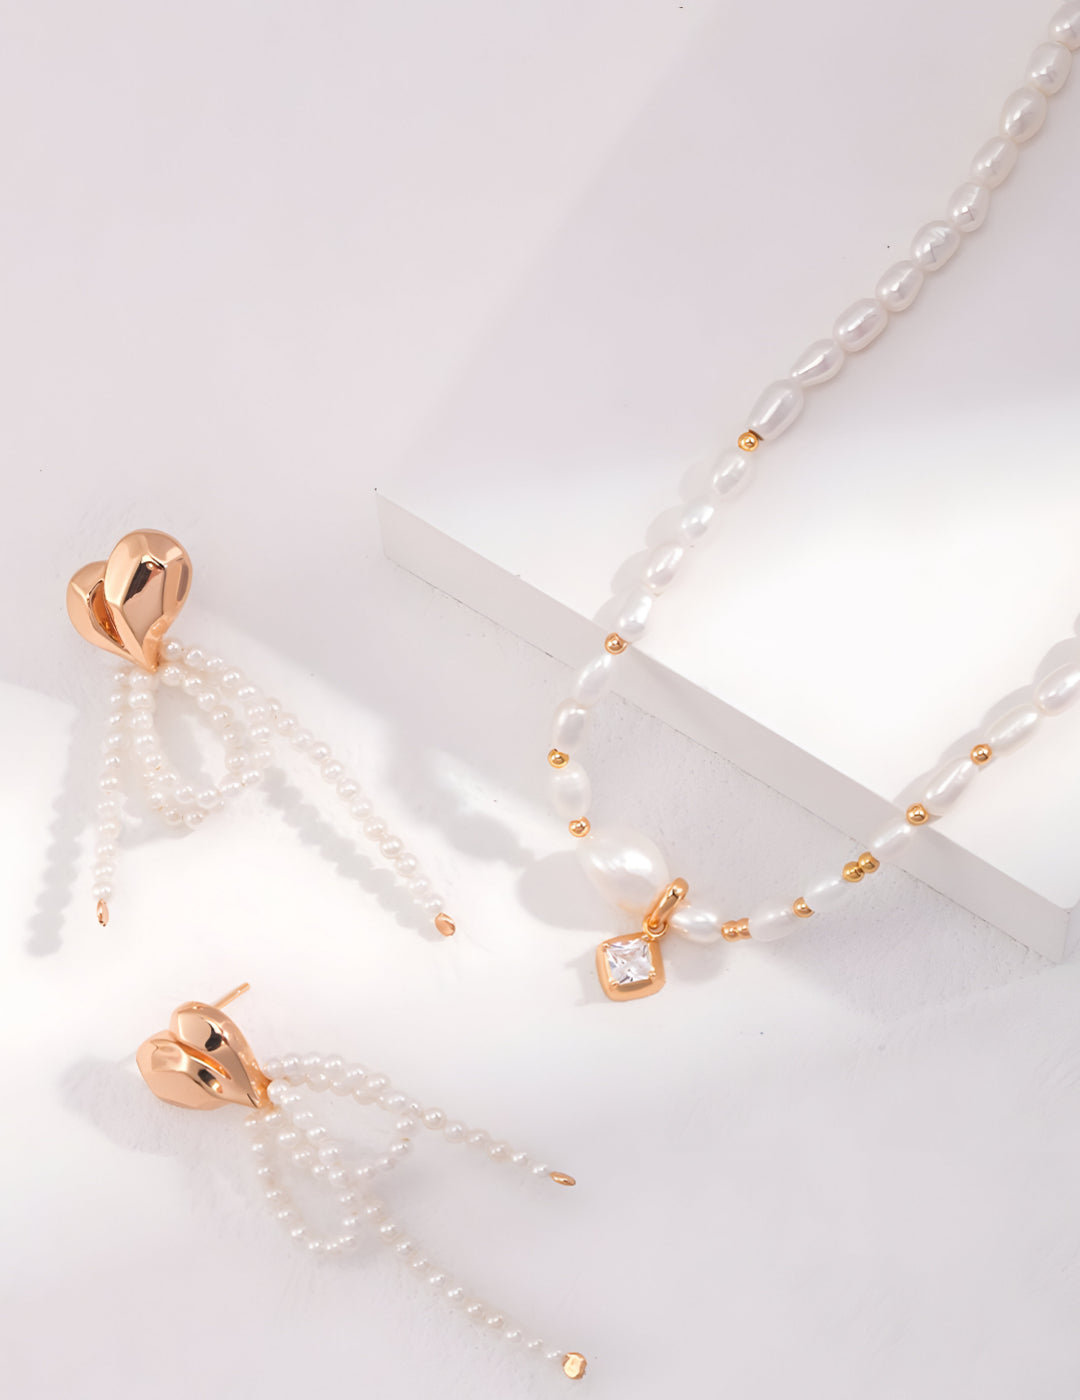 Allure of Pearl Luminance Necklace with the sparkle of Zircons - beautifully combined to create a captivating piece -  S925 Sterling Silver with 18K Gold-plated necklace - radiant and lively accessory.